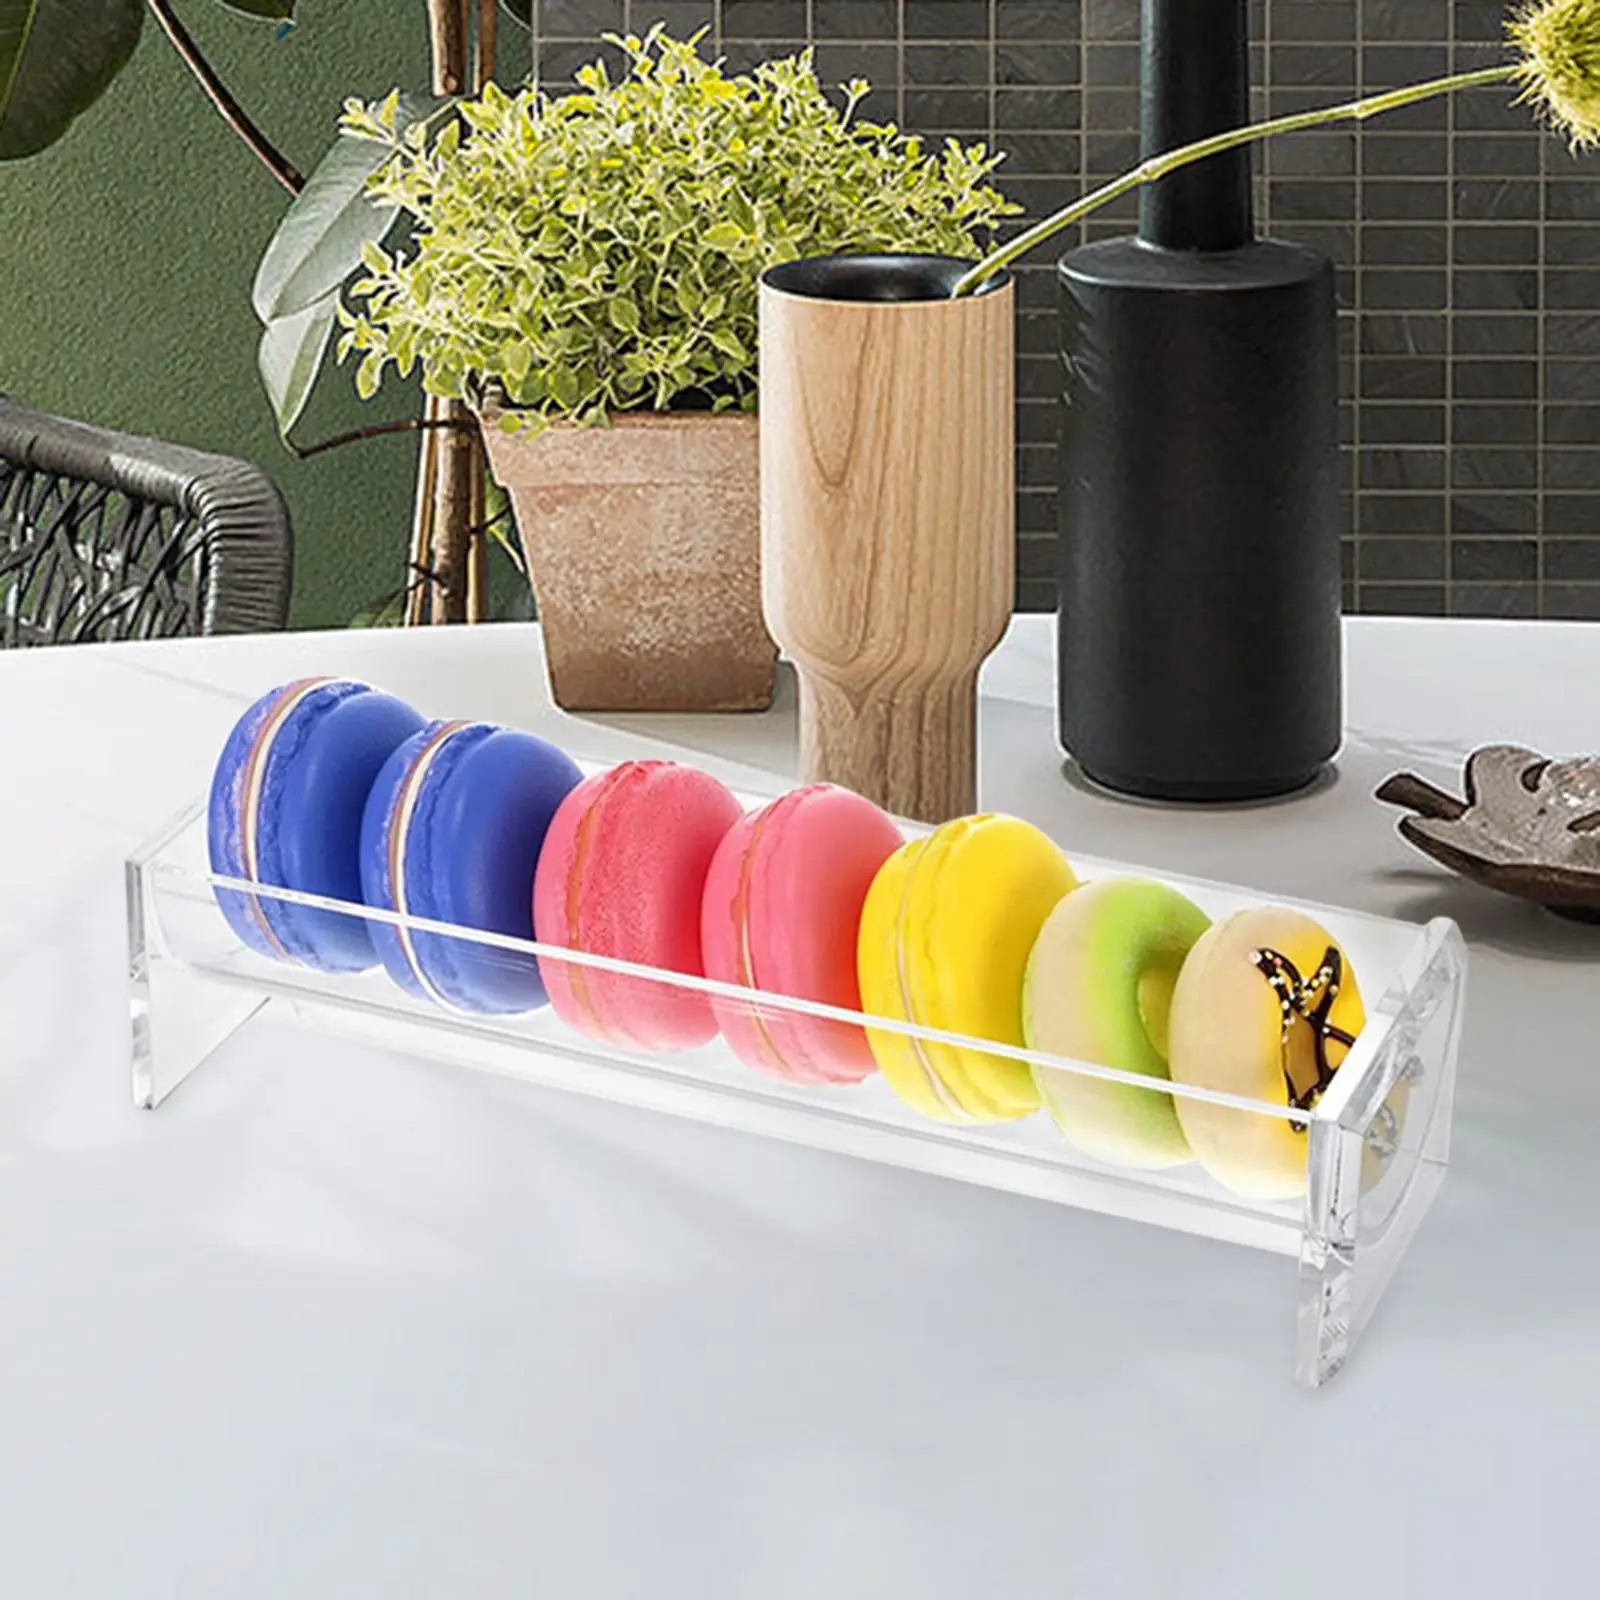 Acrylic Display Holder Rectangular Dessert towers Pastry Holder Display Stand for Macaron Appetizer Party Wedding Countertop